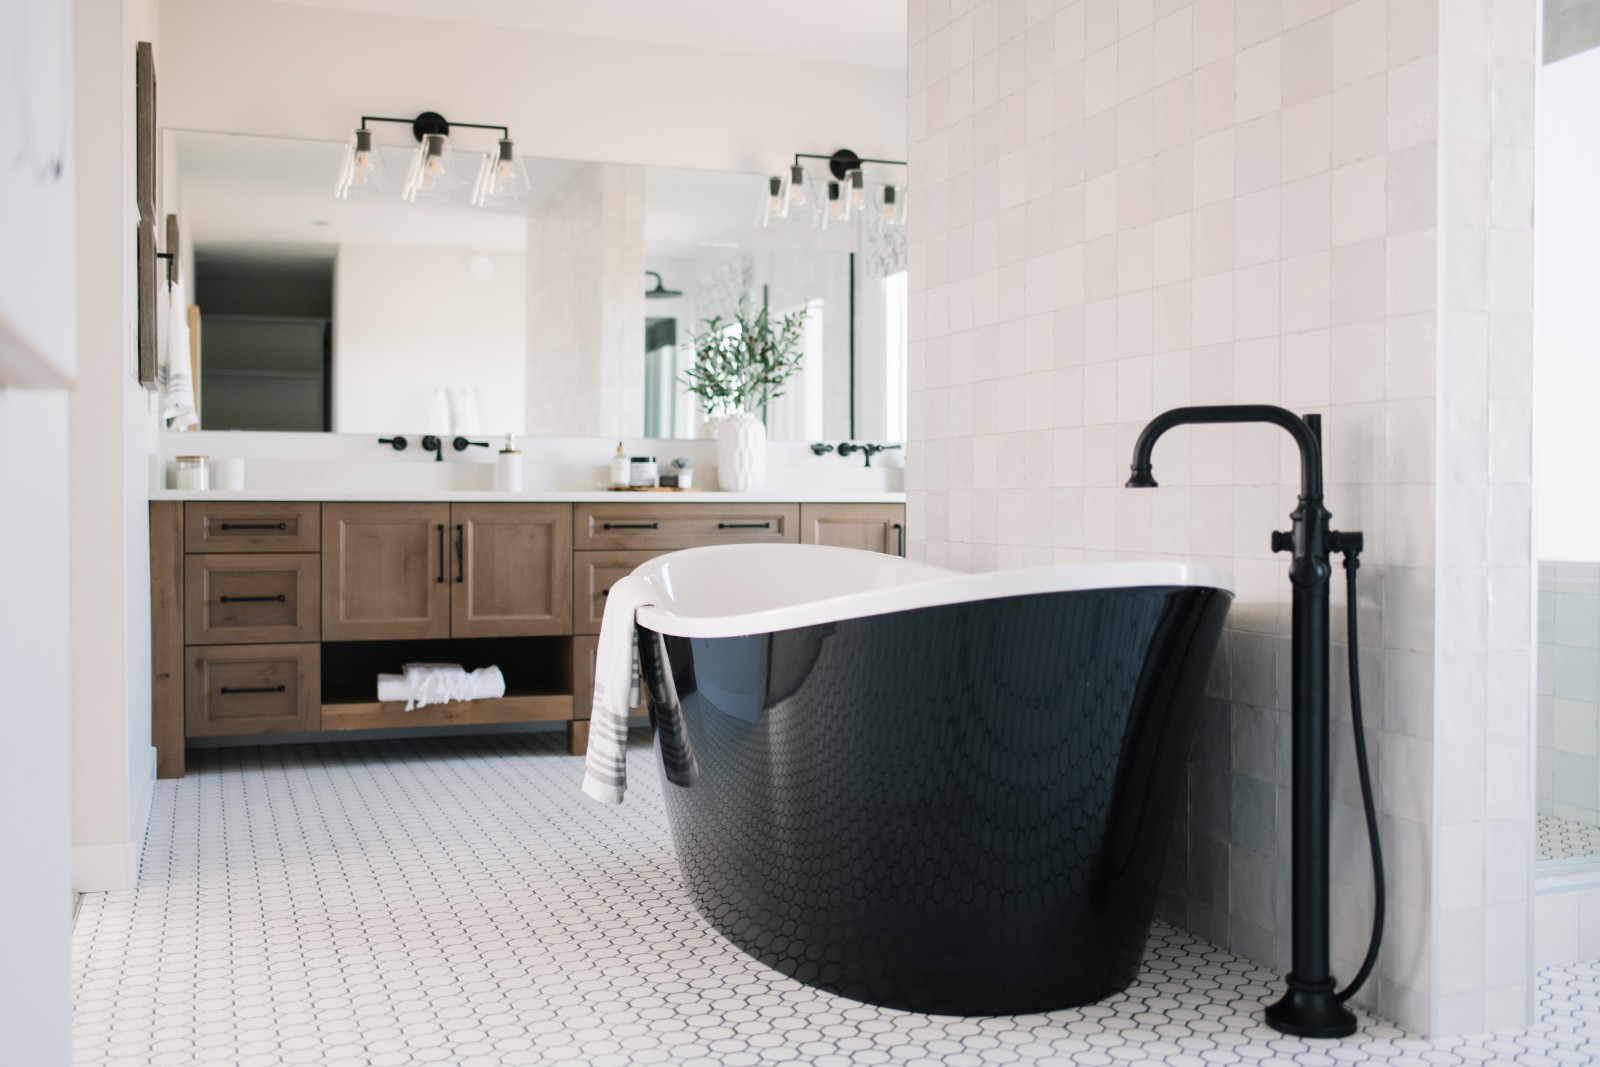 A warm and inviting ensuite with black soaker tub in the center of the room infront of a wall of simple textured tile. A warm wood can be seen at the back of the room with open shelving for storage, white countertops, vessel sinks and wall mounted, black faucets.